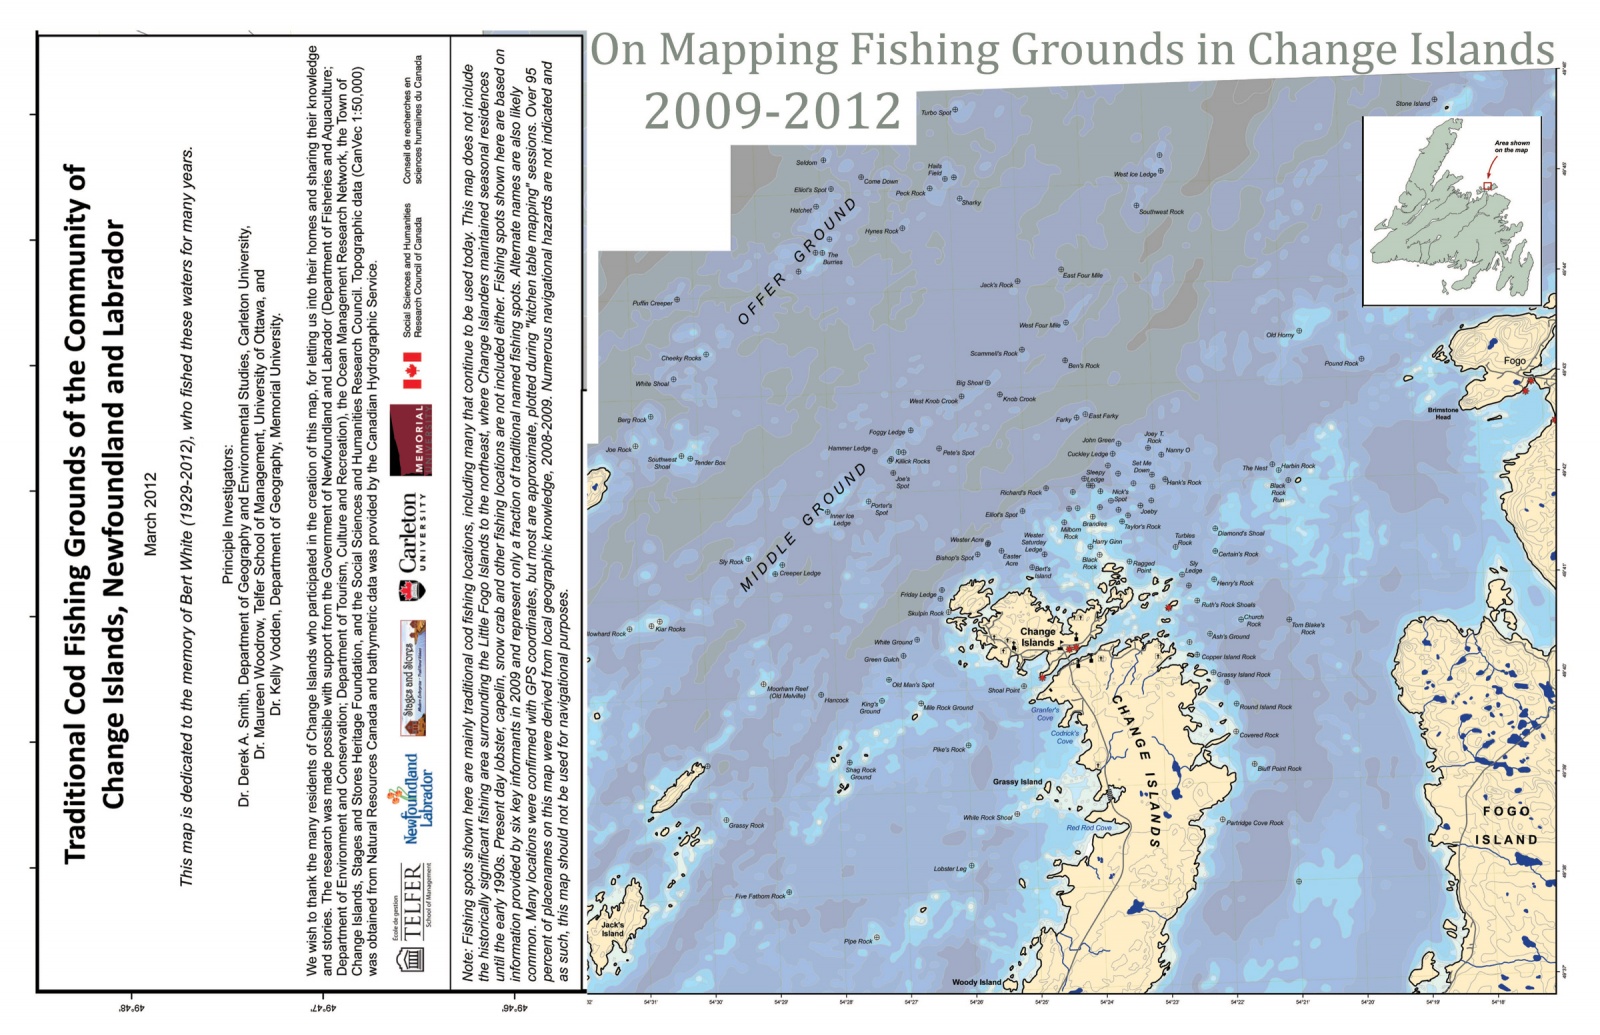 On Mapping Fishing Grounds in Change Islands 2009-2012